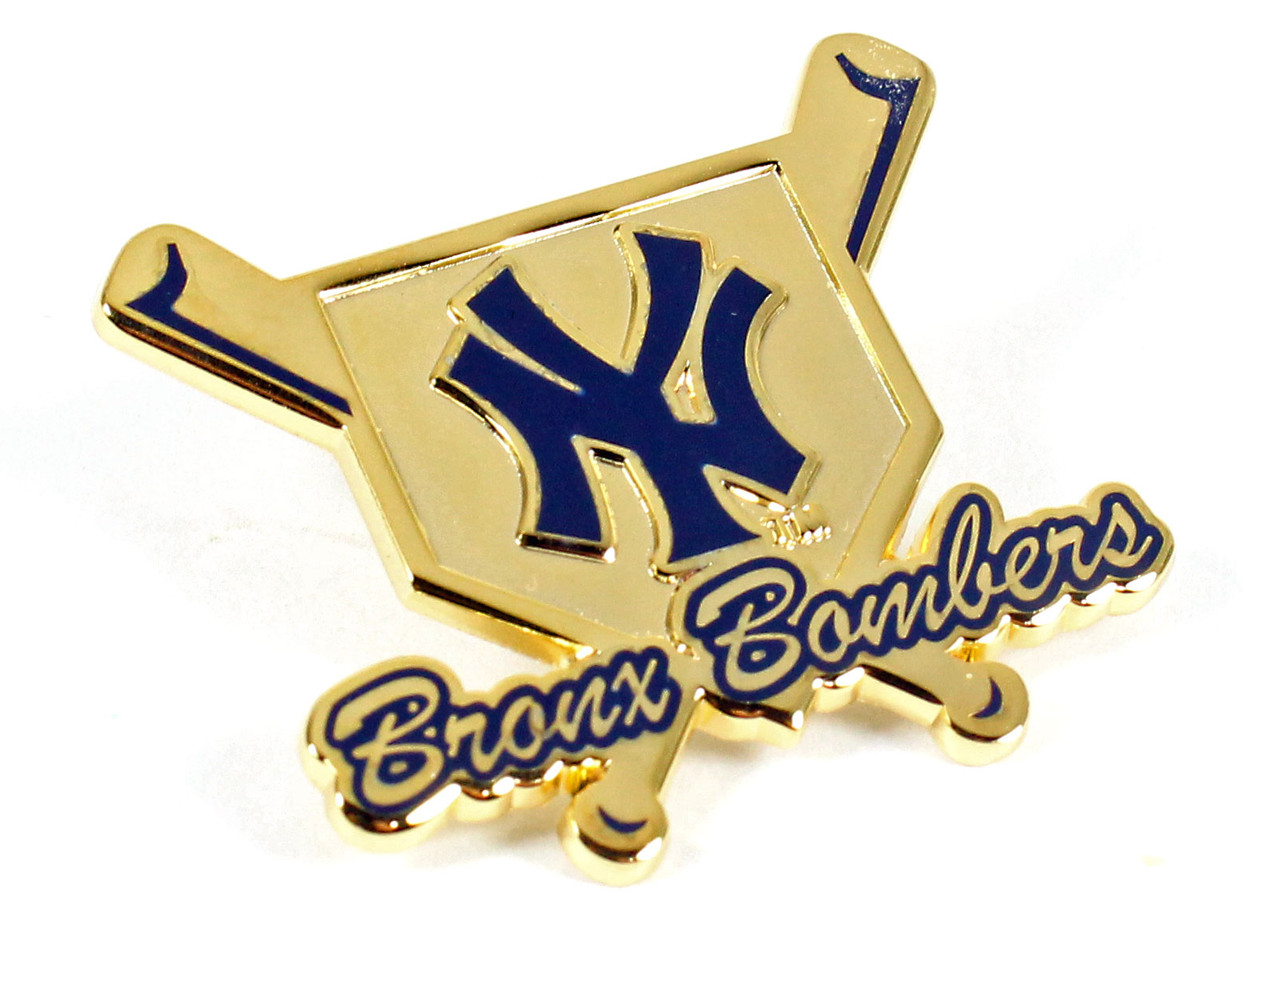 New York Yankees, Official Site of the Bronx Bombers